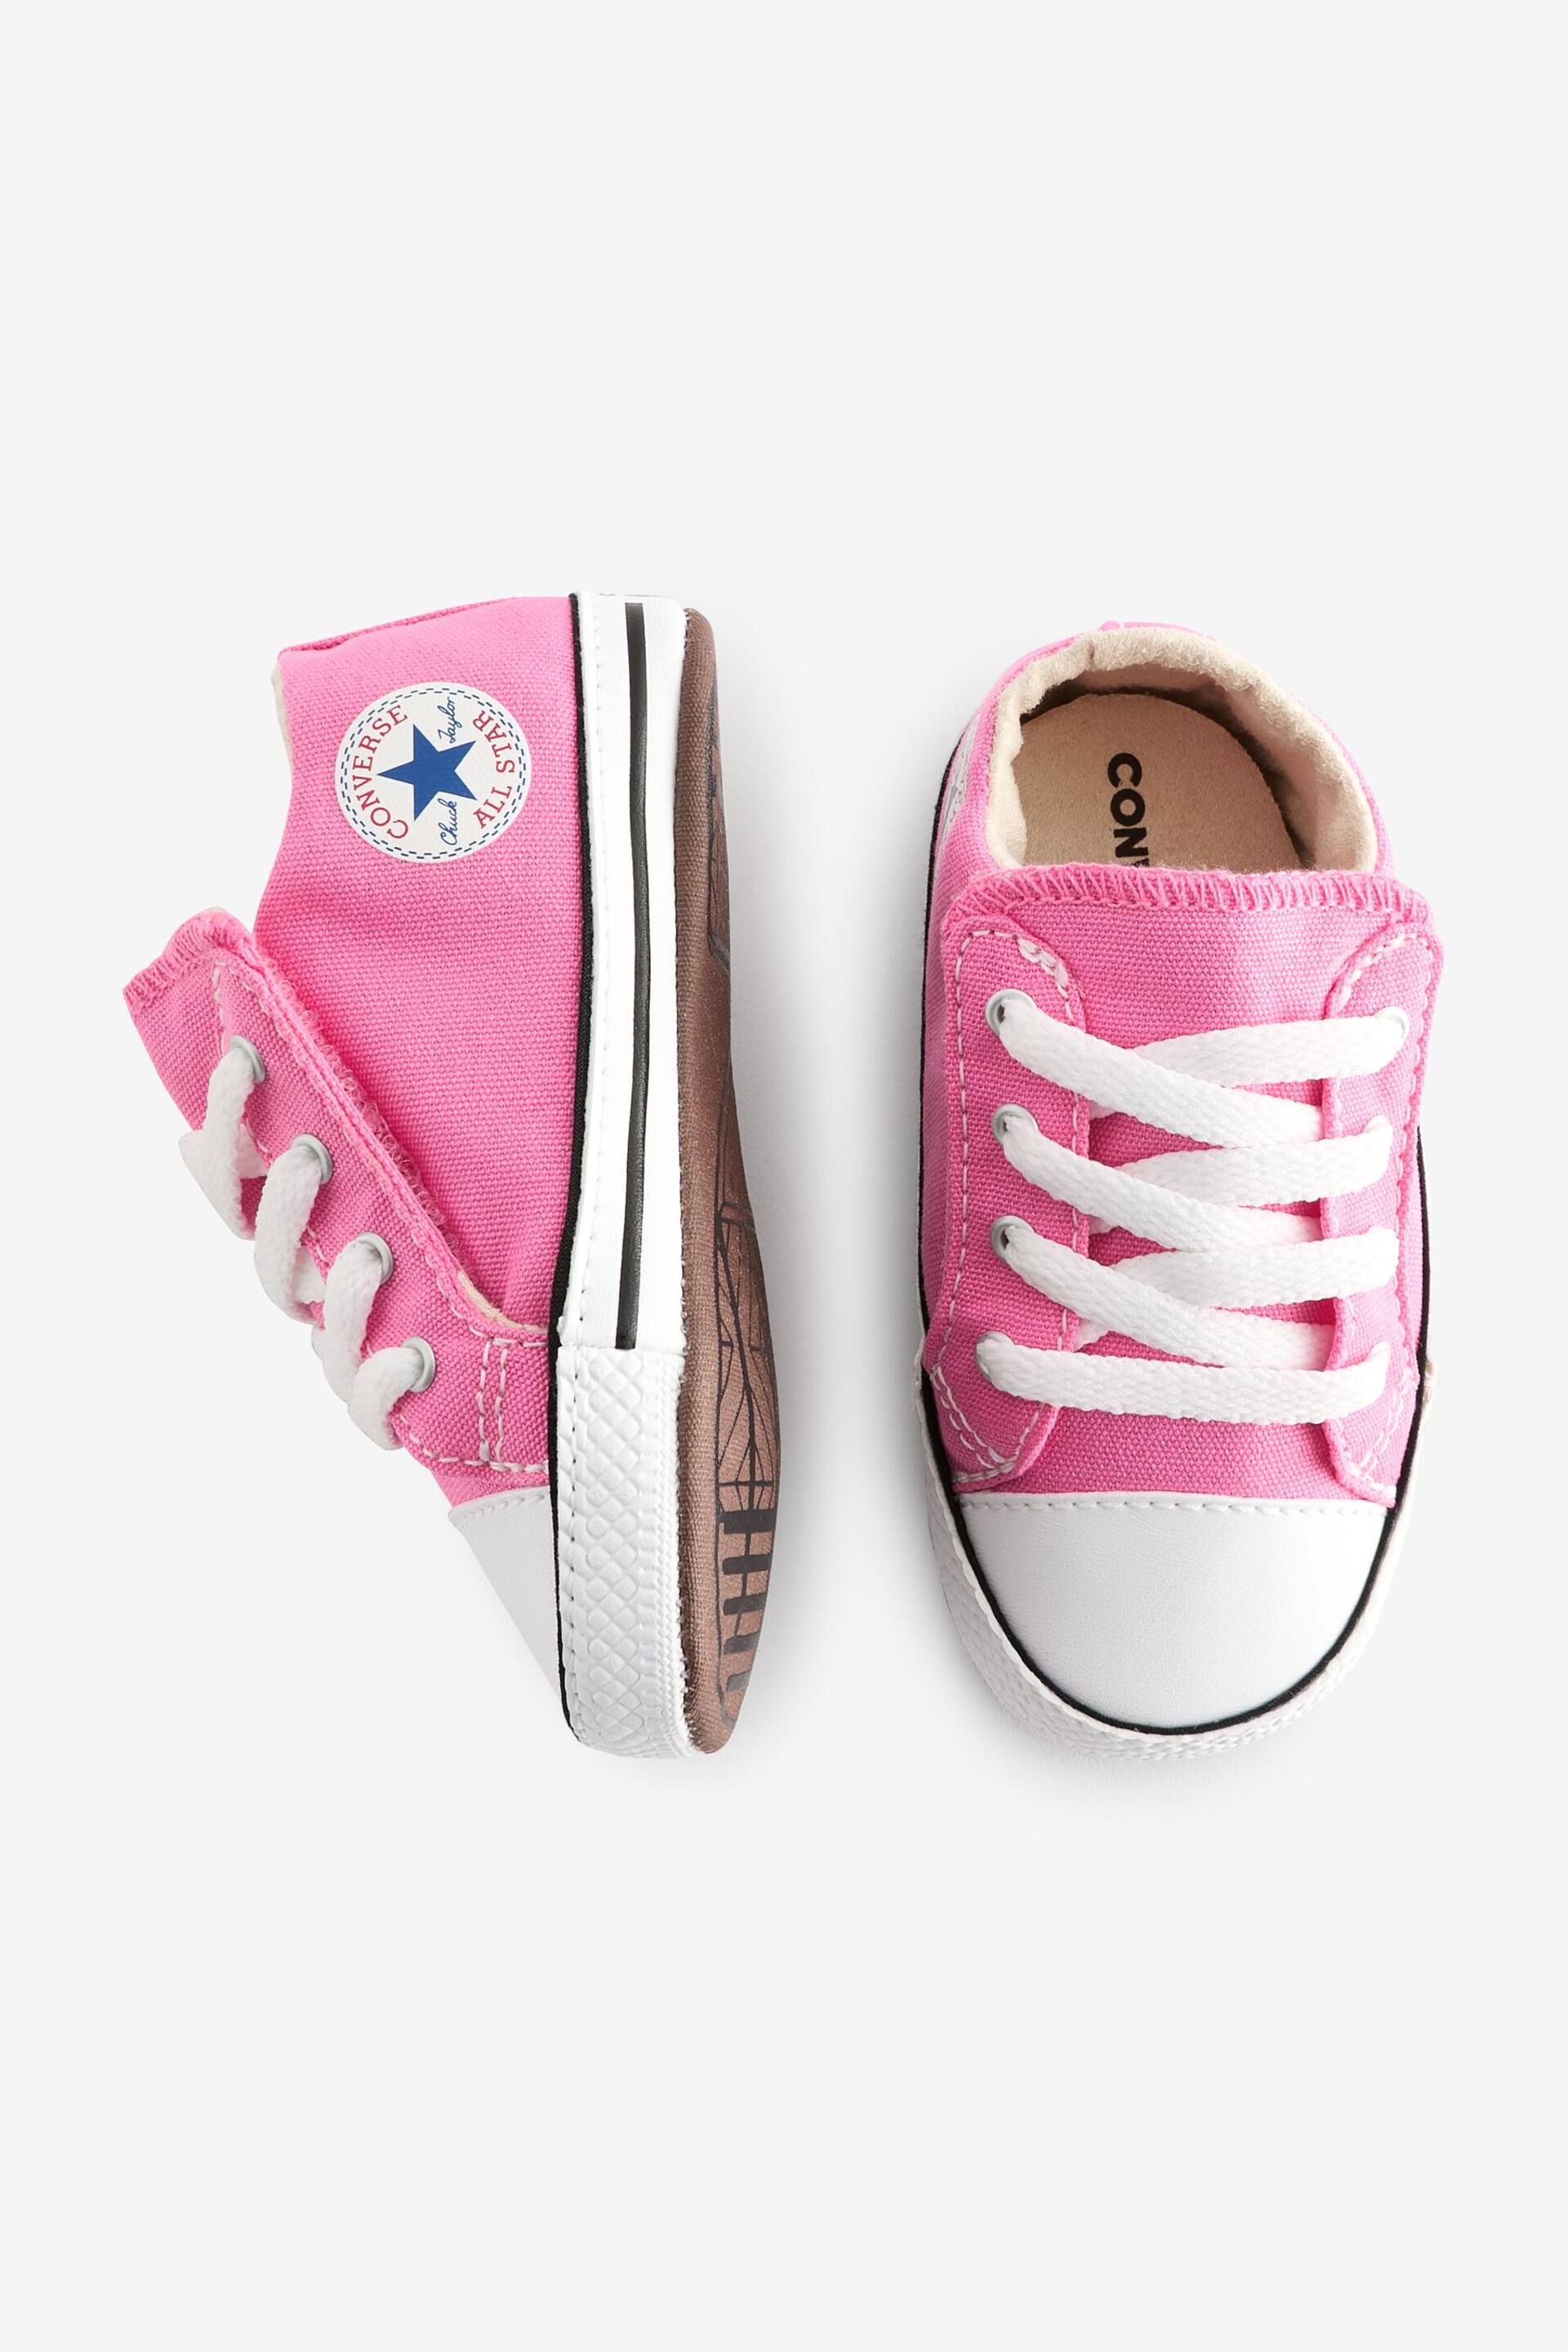 Converse Pink Chuck Taylor All Star Pram Shoes - Image 5 of 9